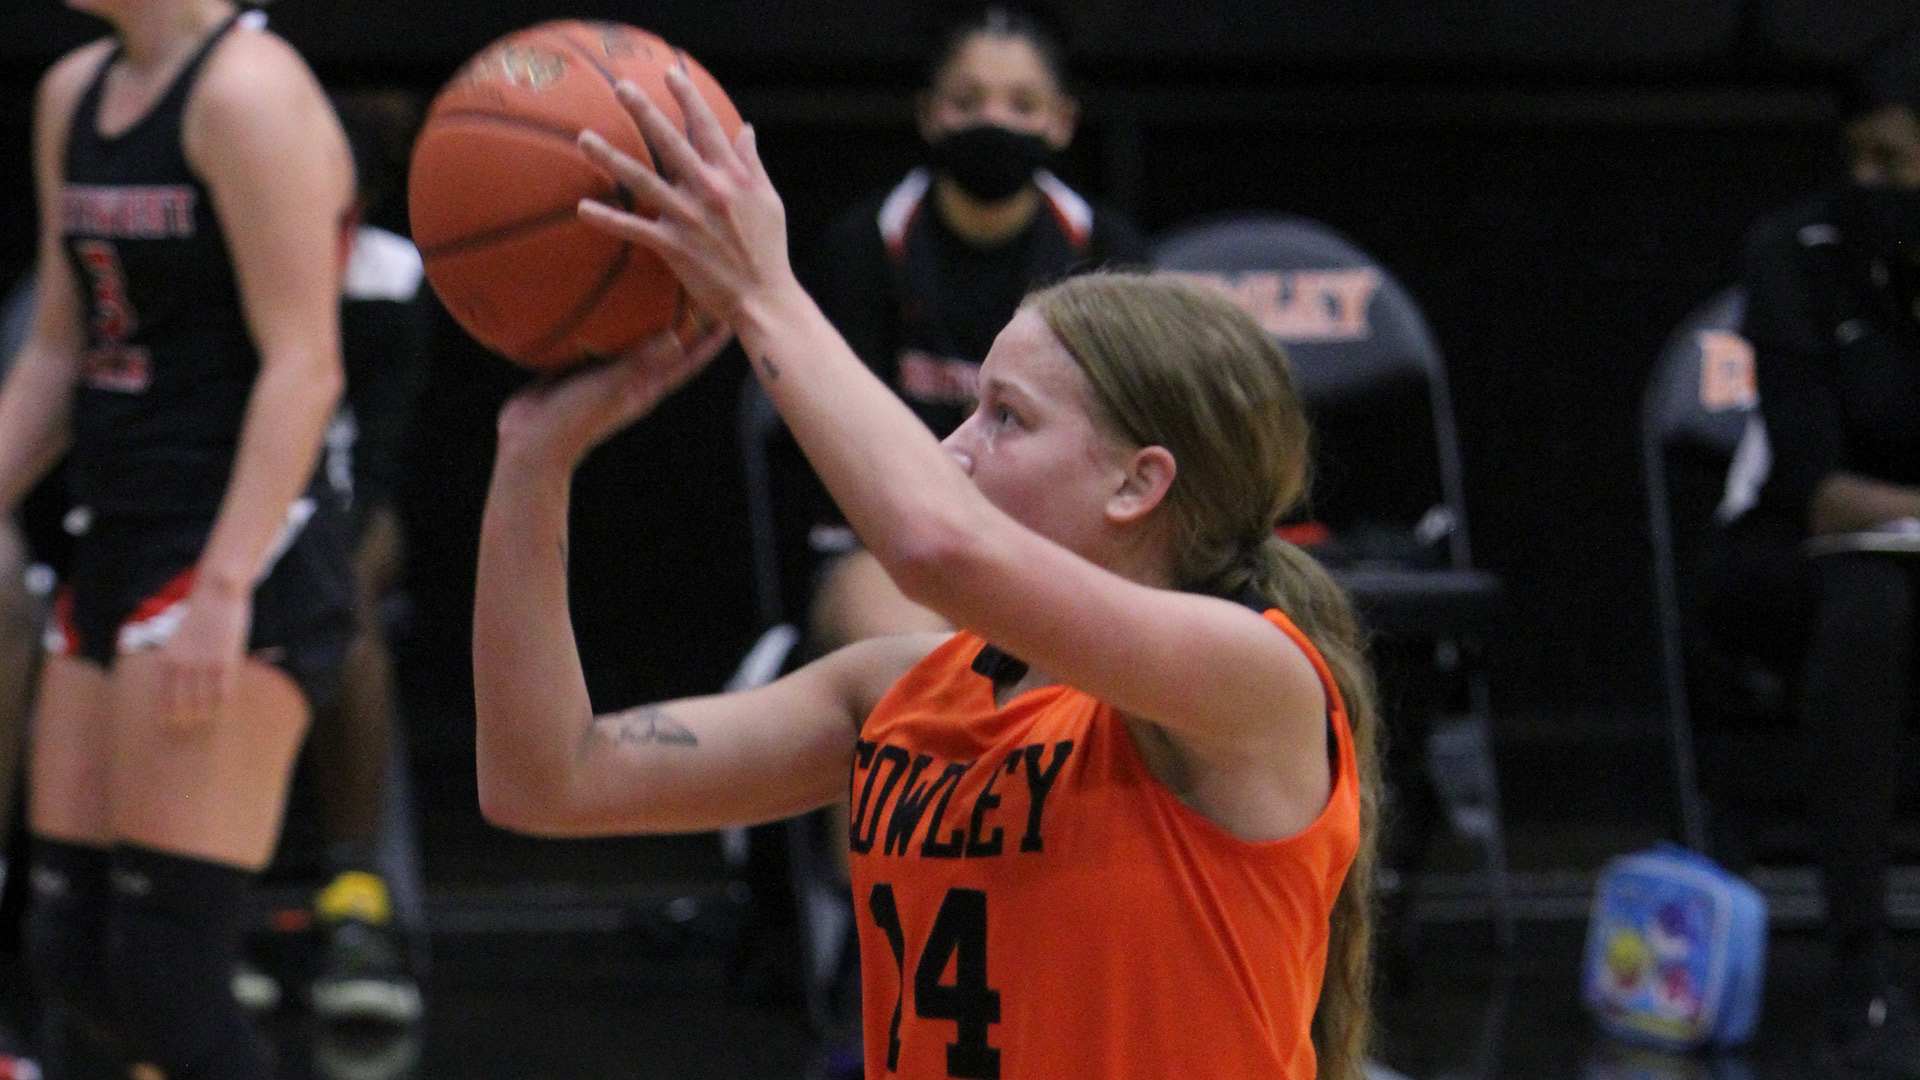 Lady Tigers put it all together in 88-54 win over Northwest Kansas Tech